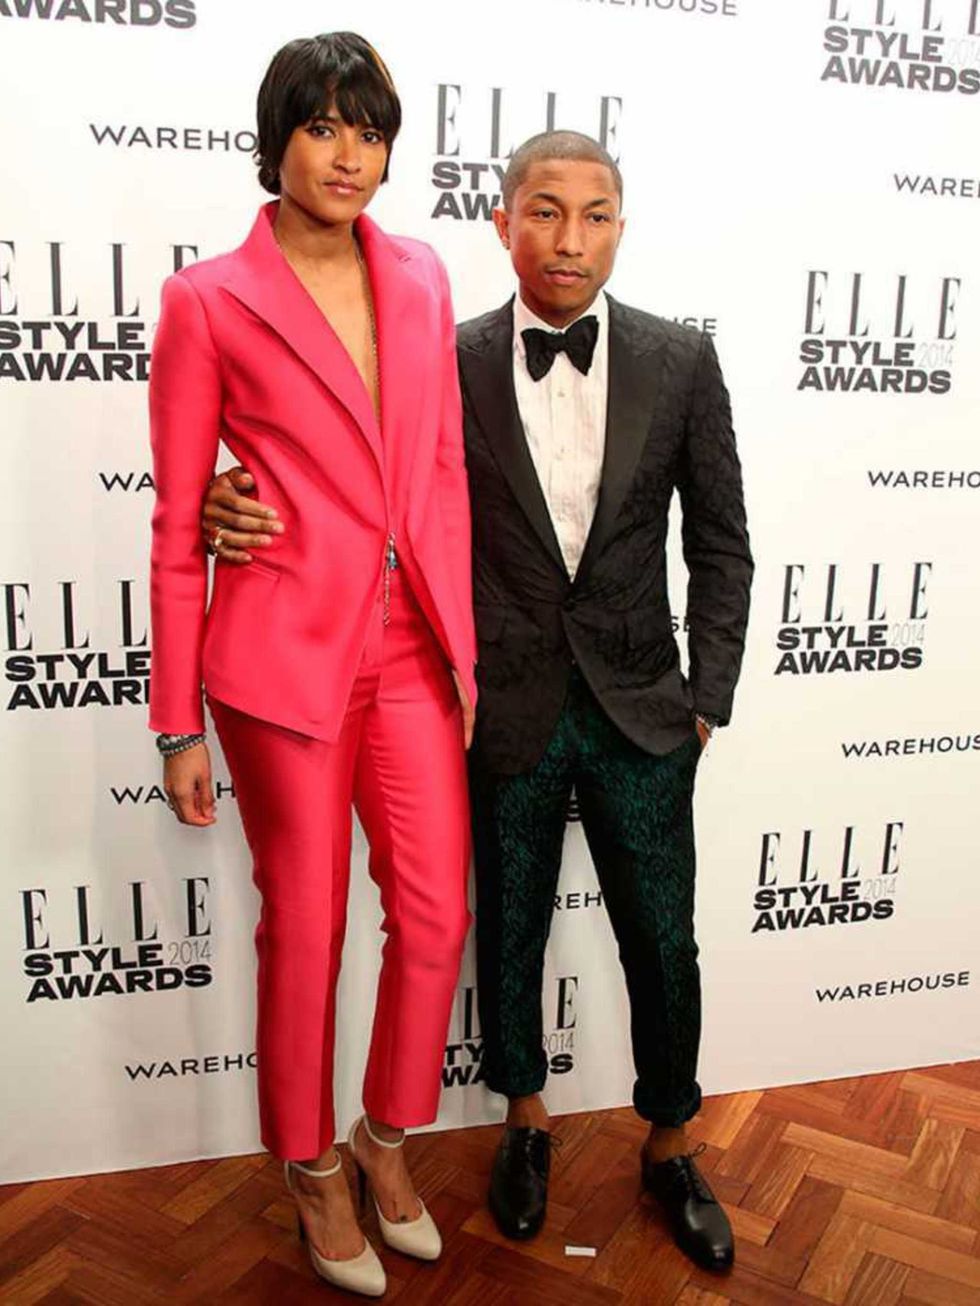 Pharrell Williams, wearing Lanvin, with his wife Helen Lasichanh at the ELLE Style Awards 2014.